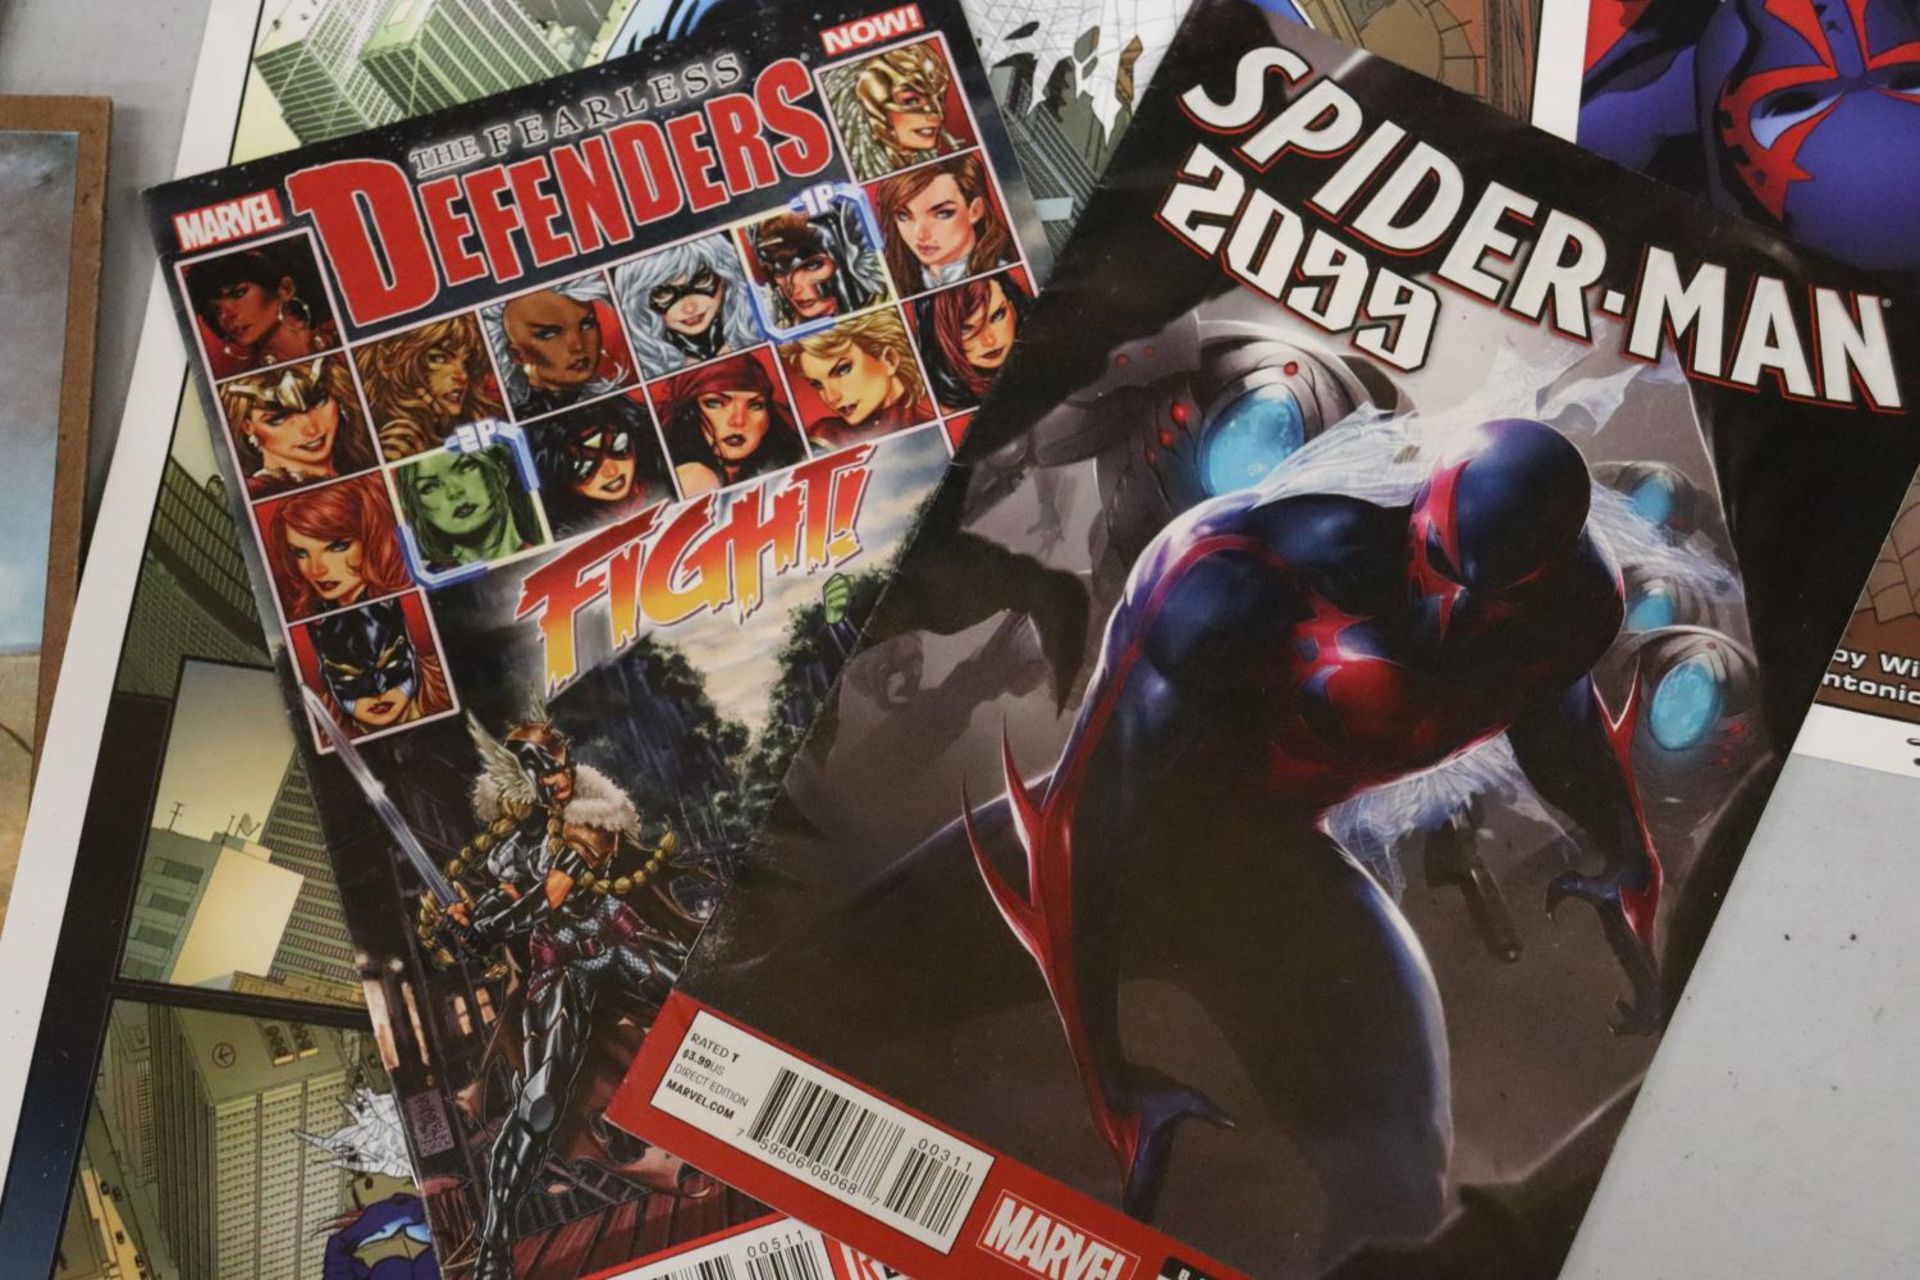 A QUANTITY OF SUPERHERO RELATED POSTERS, MAGAZINES PLUS A MIXED MEDIA PICTURE OF SPIDERMAN WITH - Image 3 of 6